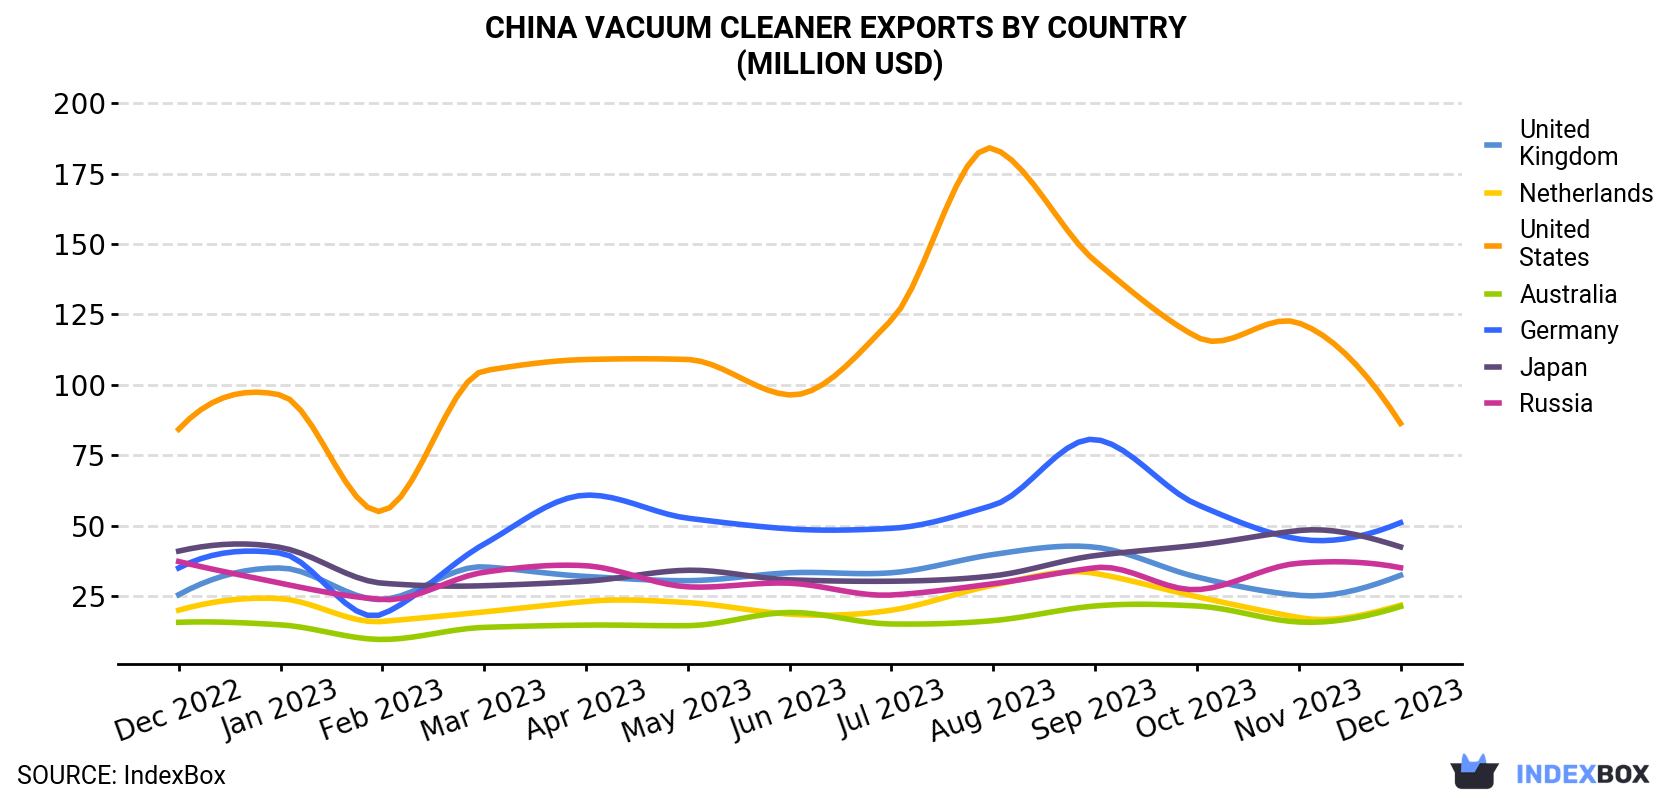 China Vacuum Cleaner Exports By Country (Million USD)